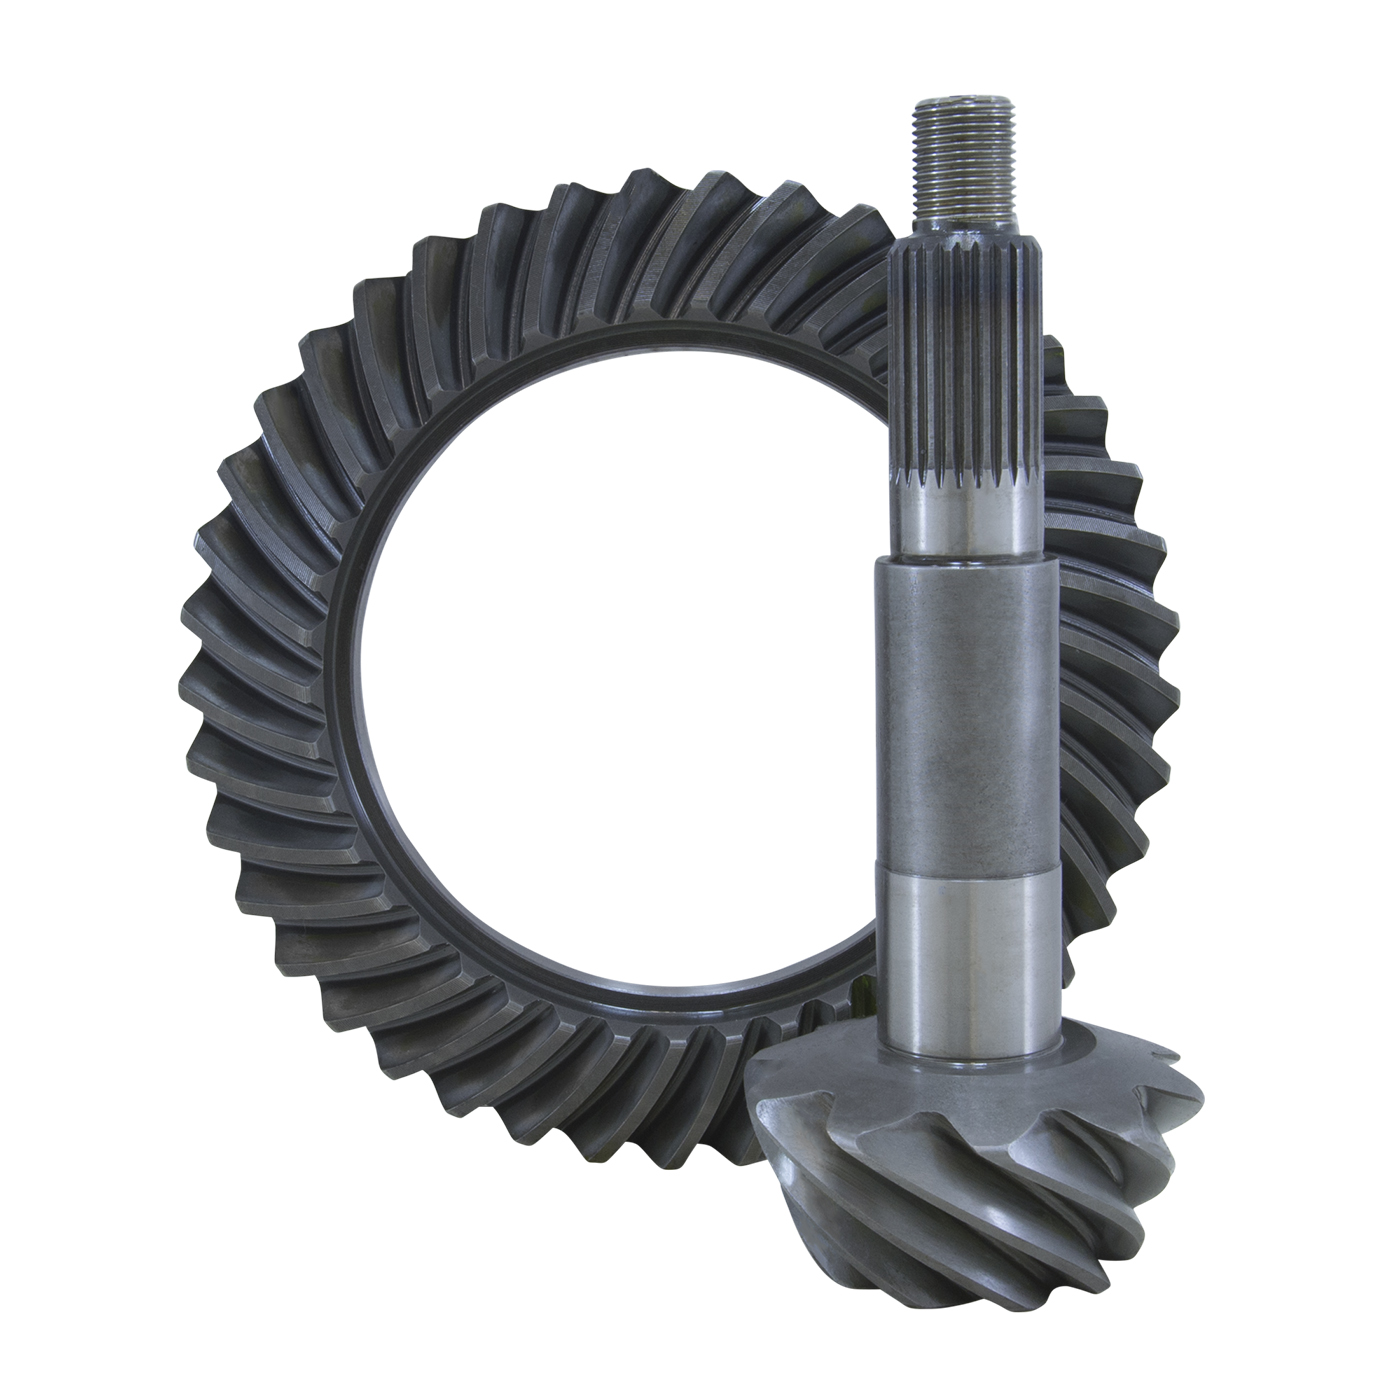 USA Standard replacement Ring & Pinion gear set (Thick) for Dana 44, 4.56 ratio